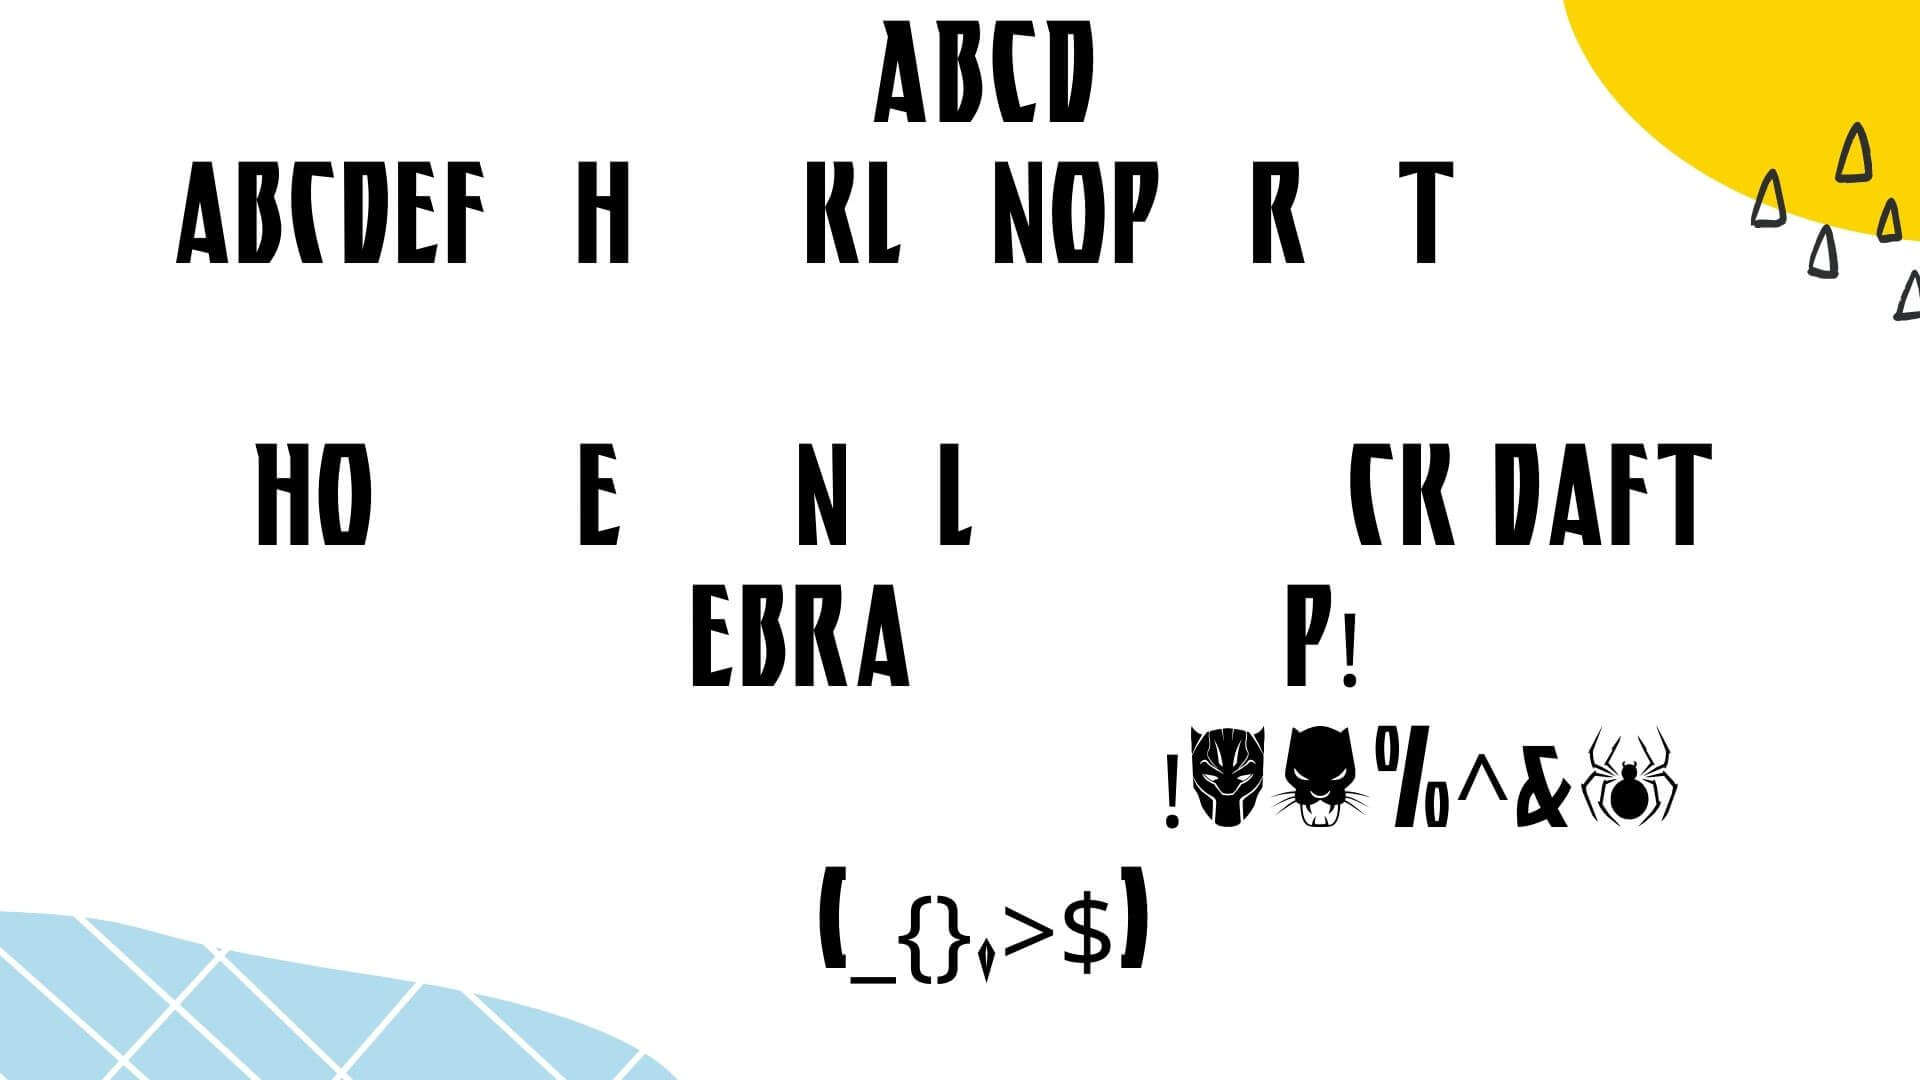 Black Panther Font View